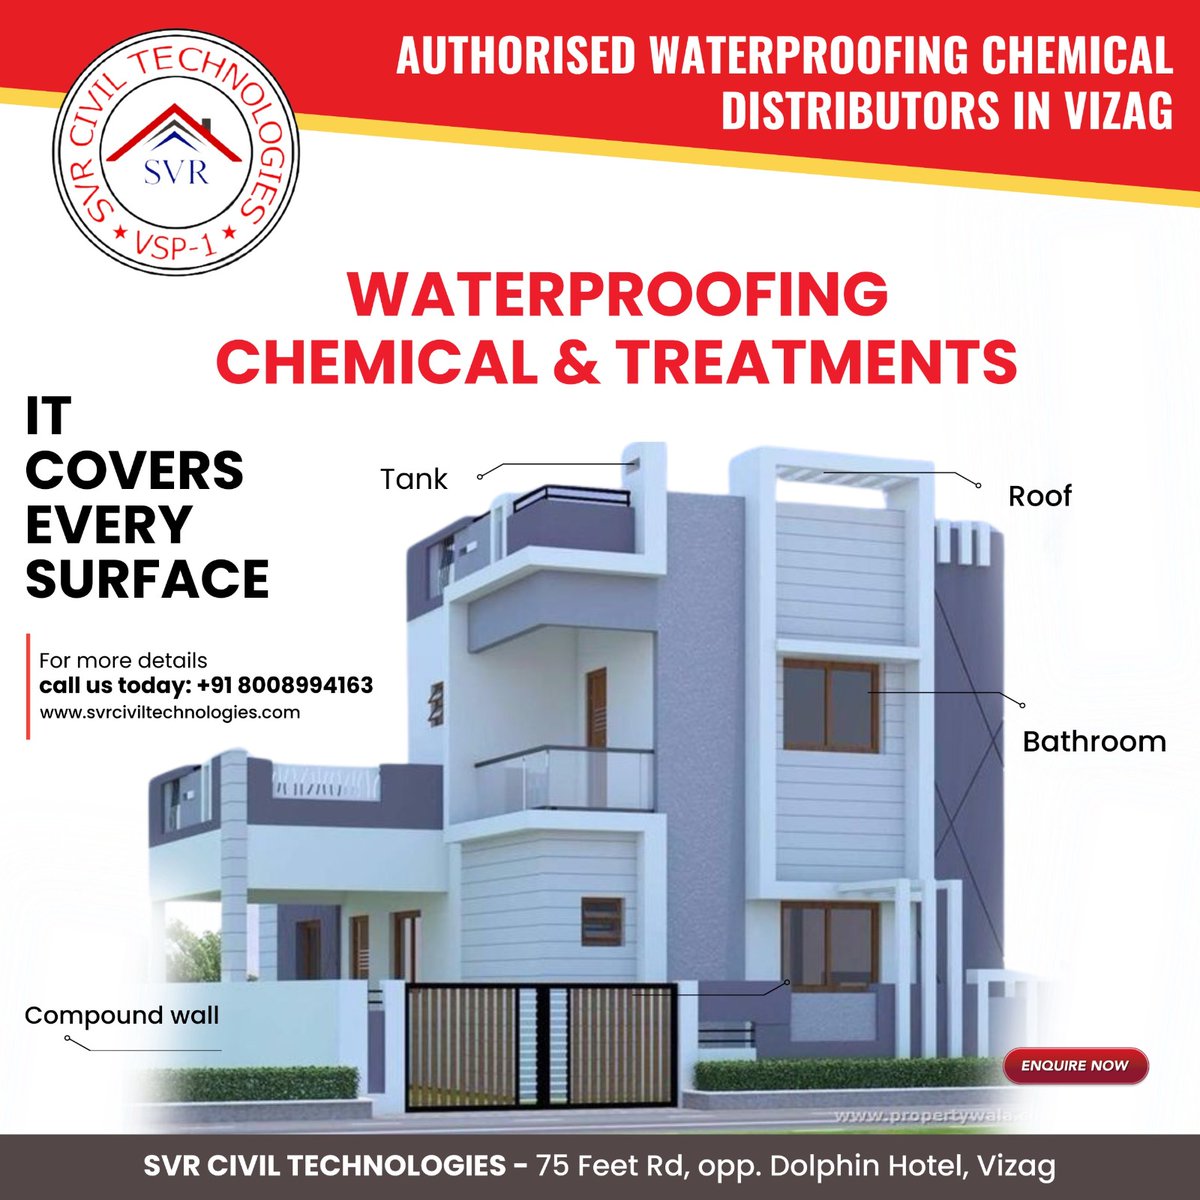 '🌊 Seeking Waterproofing Solutions in Vizag? Look no further! 

Contact us: +91 8008994163
📍 Location: SVR CIVIL TECHNOLOGIES, 75 Feet Rd, opp. Dolphin Hotel, Vizag

#WaterproofingSolutions #VizagServices #ChemicalDistribution #SurfaceProtection #HomeMaintenance 💧🏠